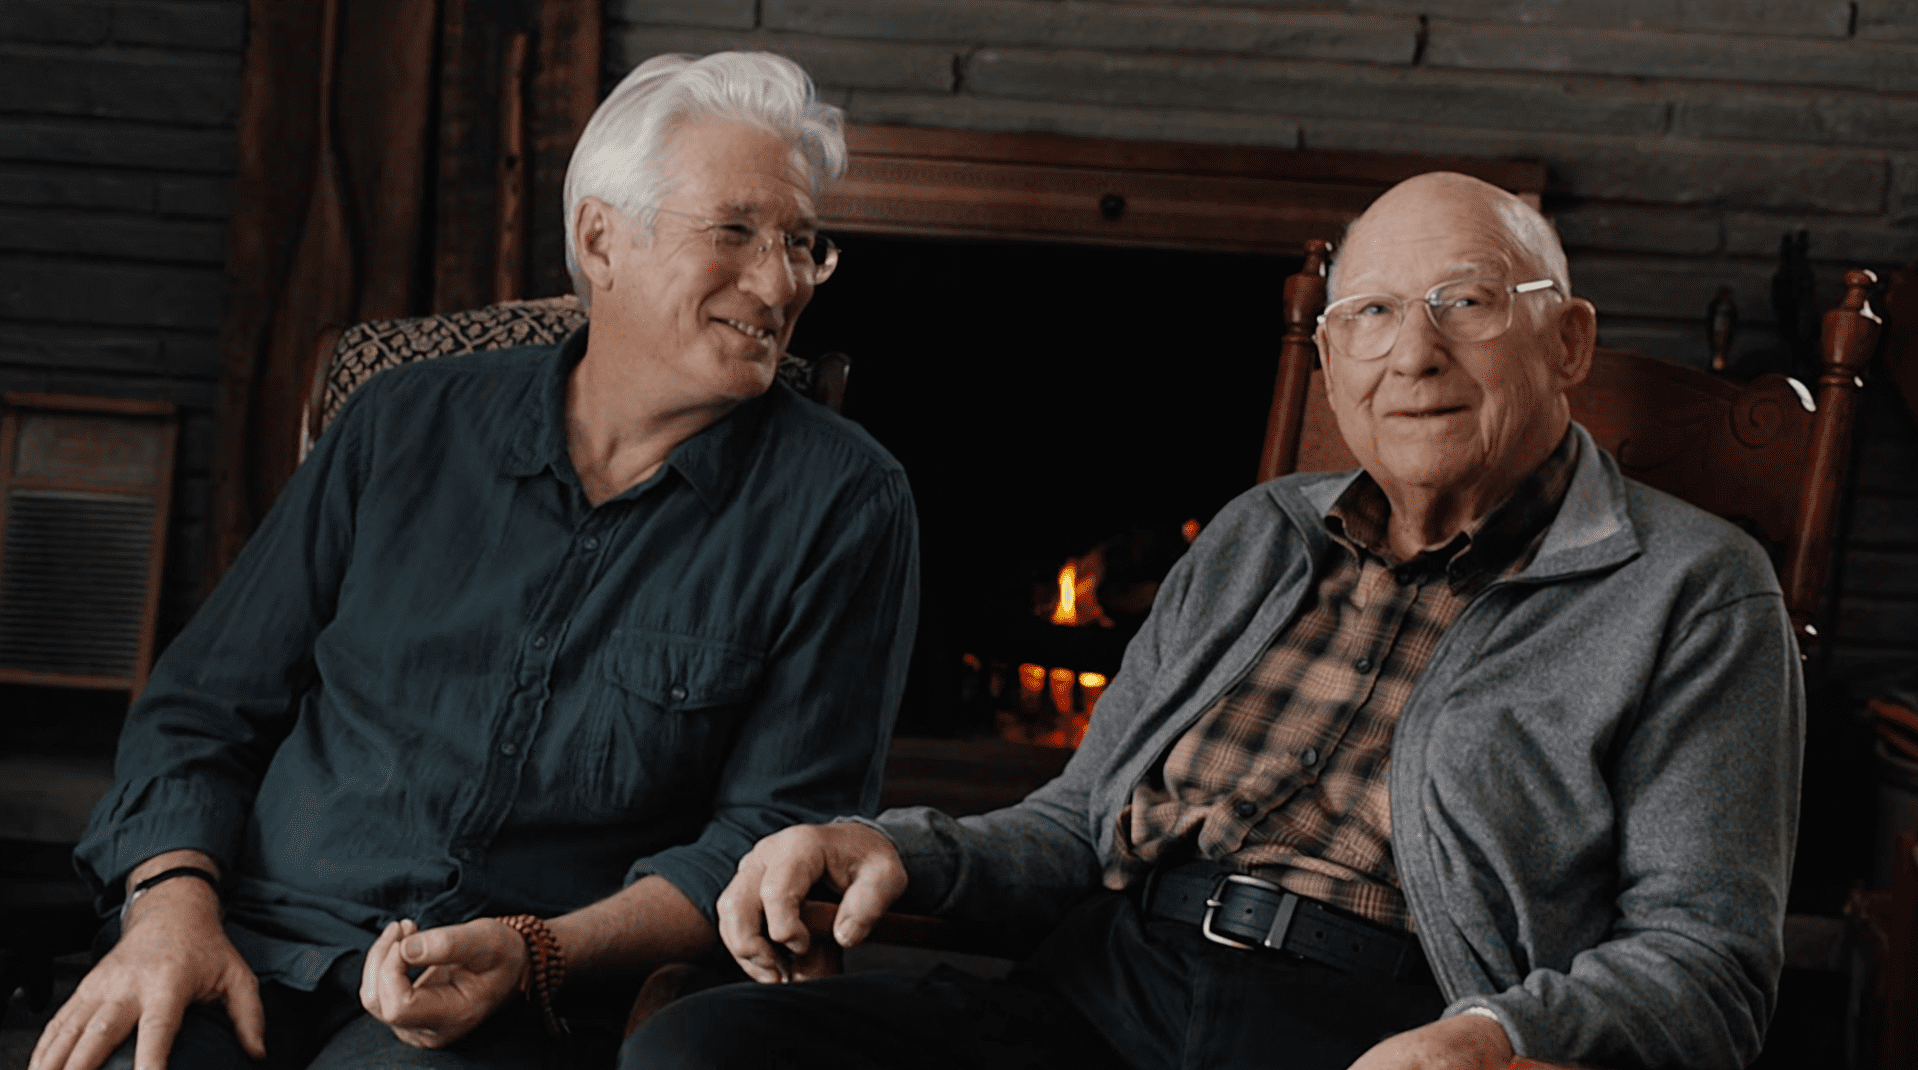 Richard Gere and his father Homer Gere. | Source: youtube.com/Meals On Wheels Central Texas